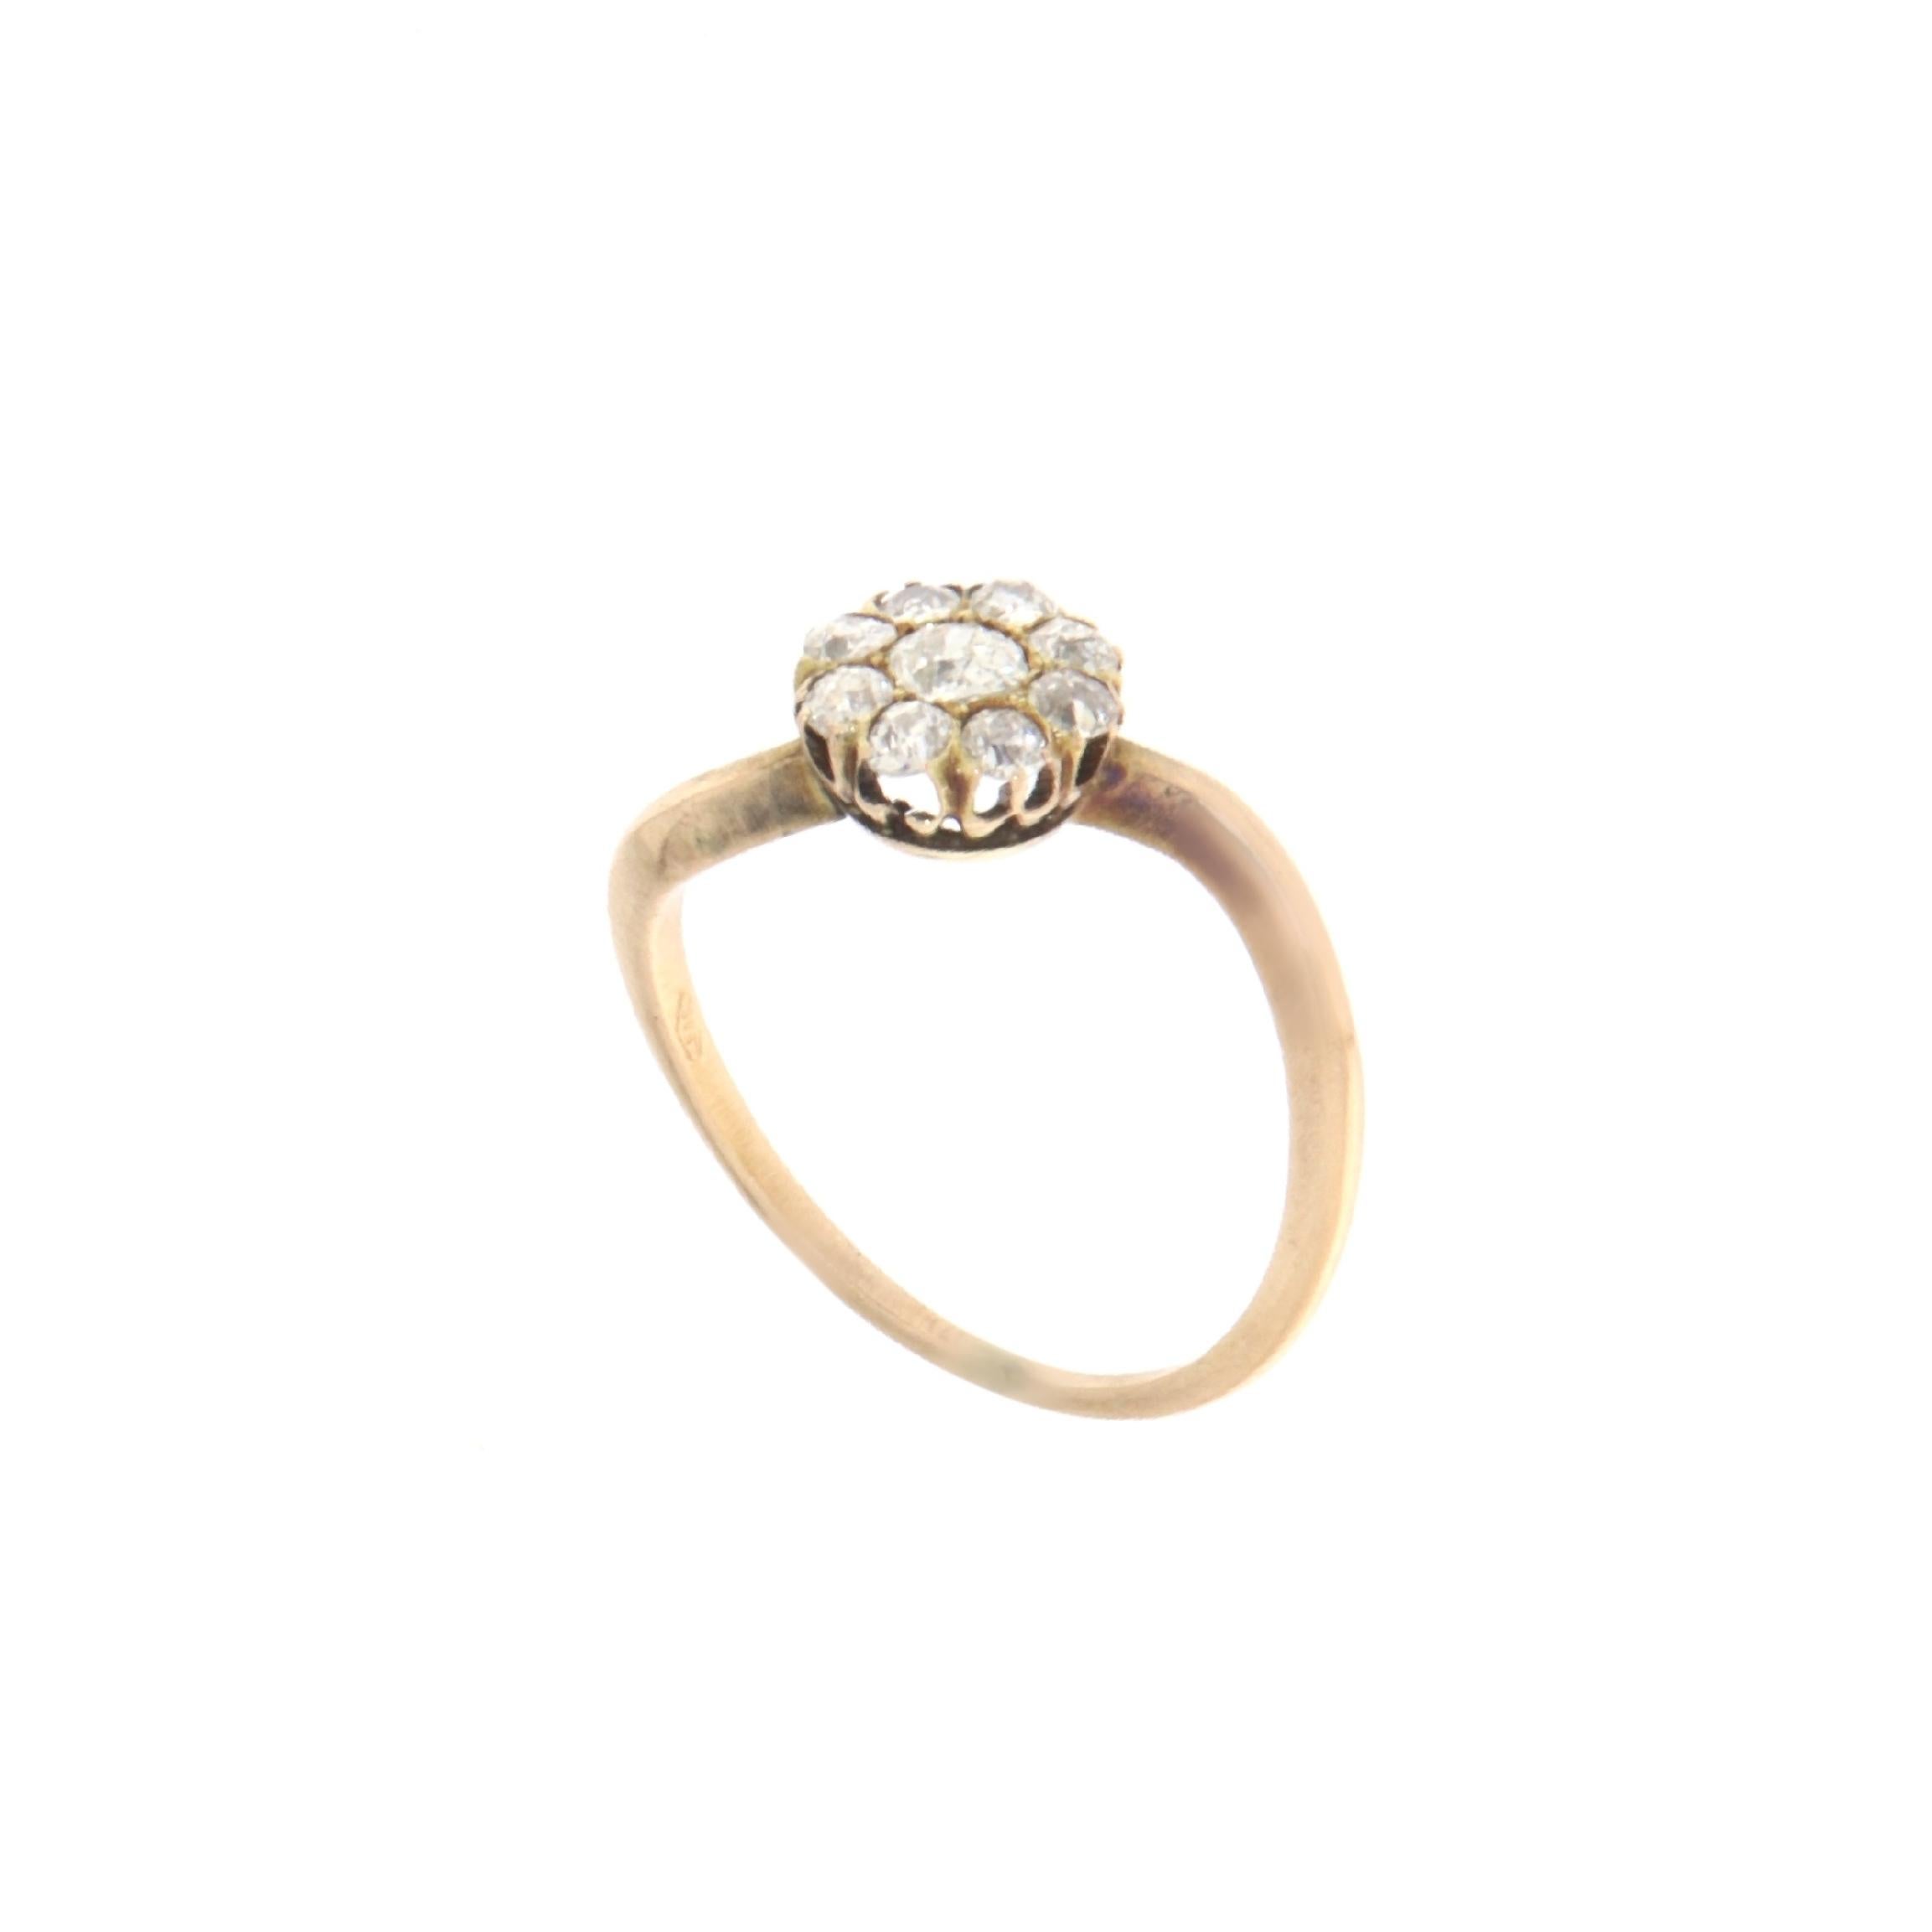 This enchanting ring is a treasure of simplicity and elegance, crafted in 14-karat yellow gold. It features a cluster of brilliant diamonds that come together to form a delicate floral motif, symbolizing everlasting beauty and grace. Each diamond is